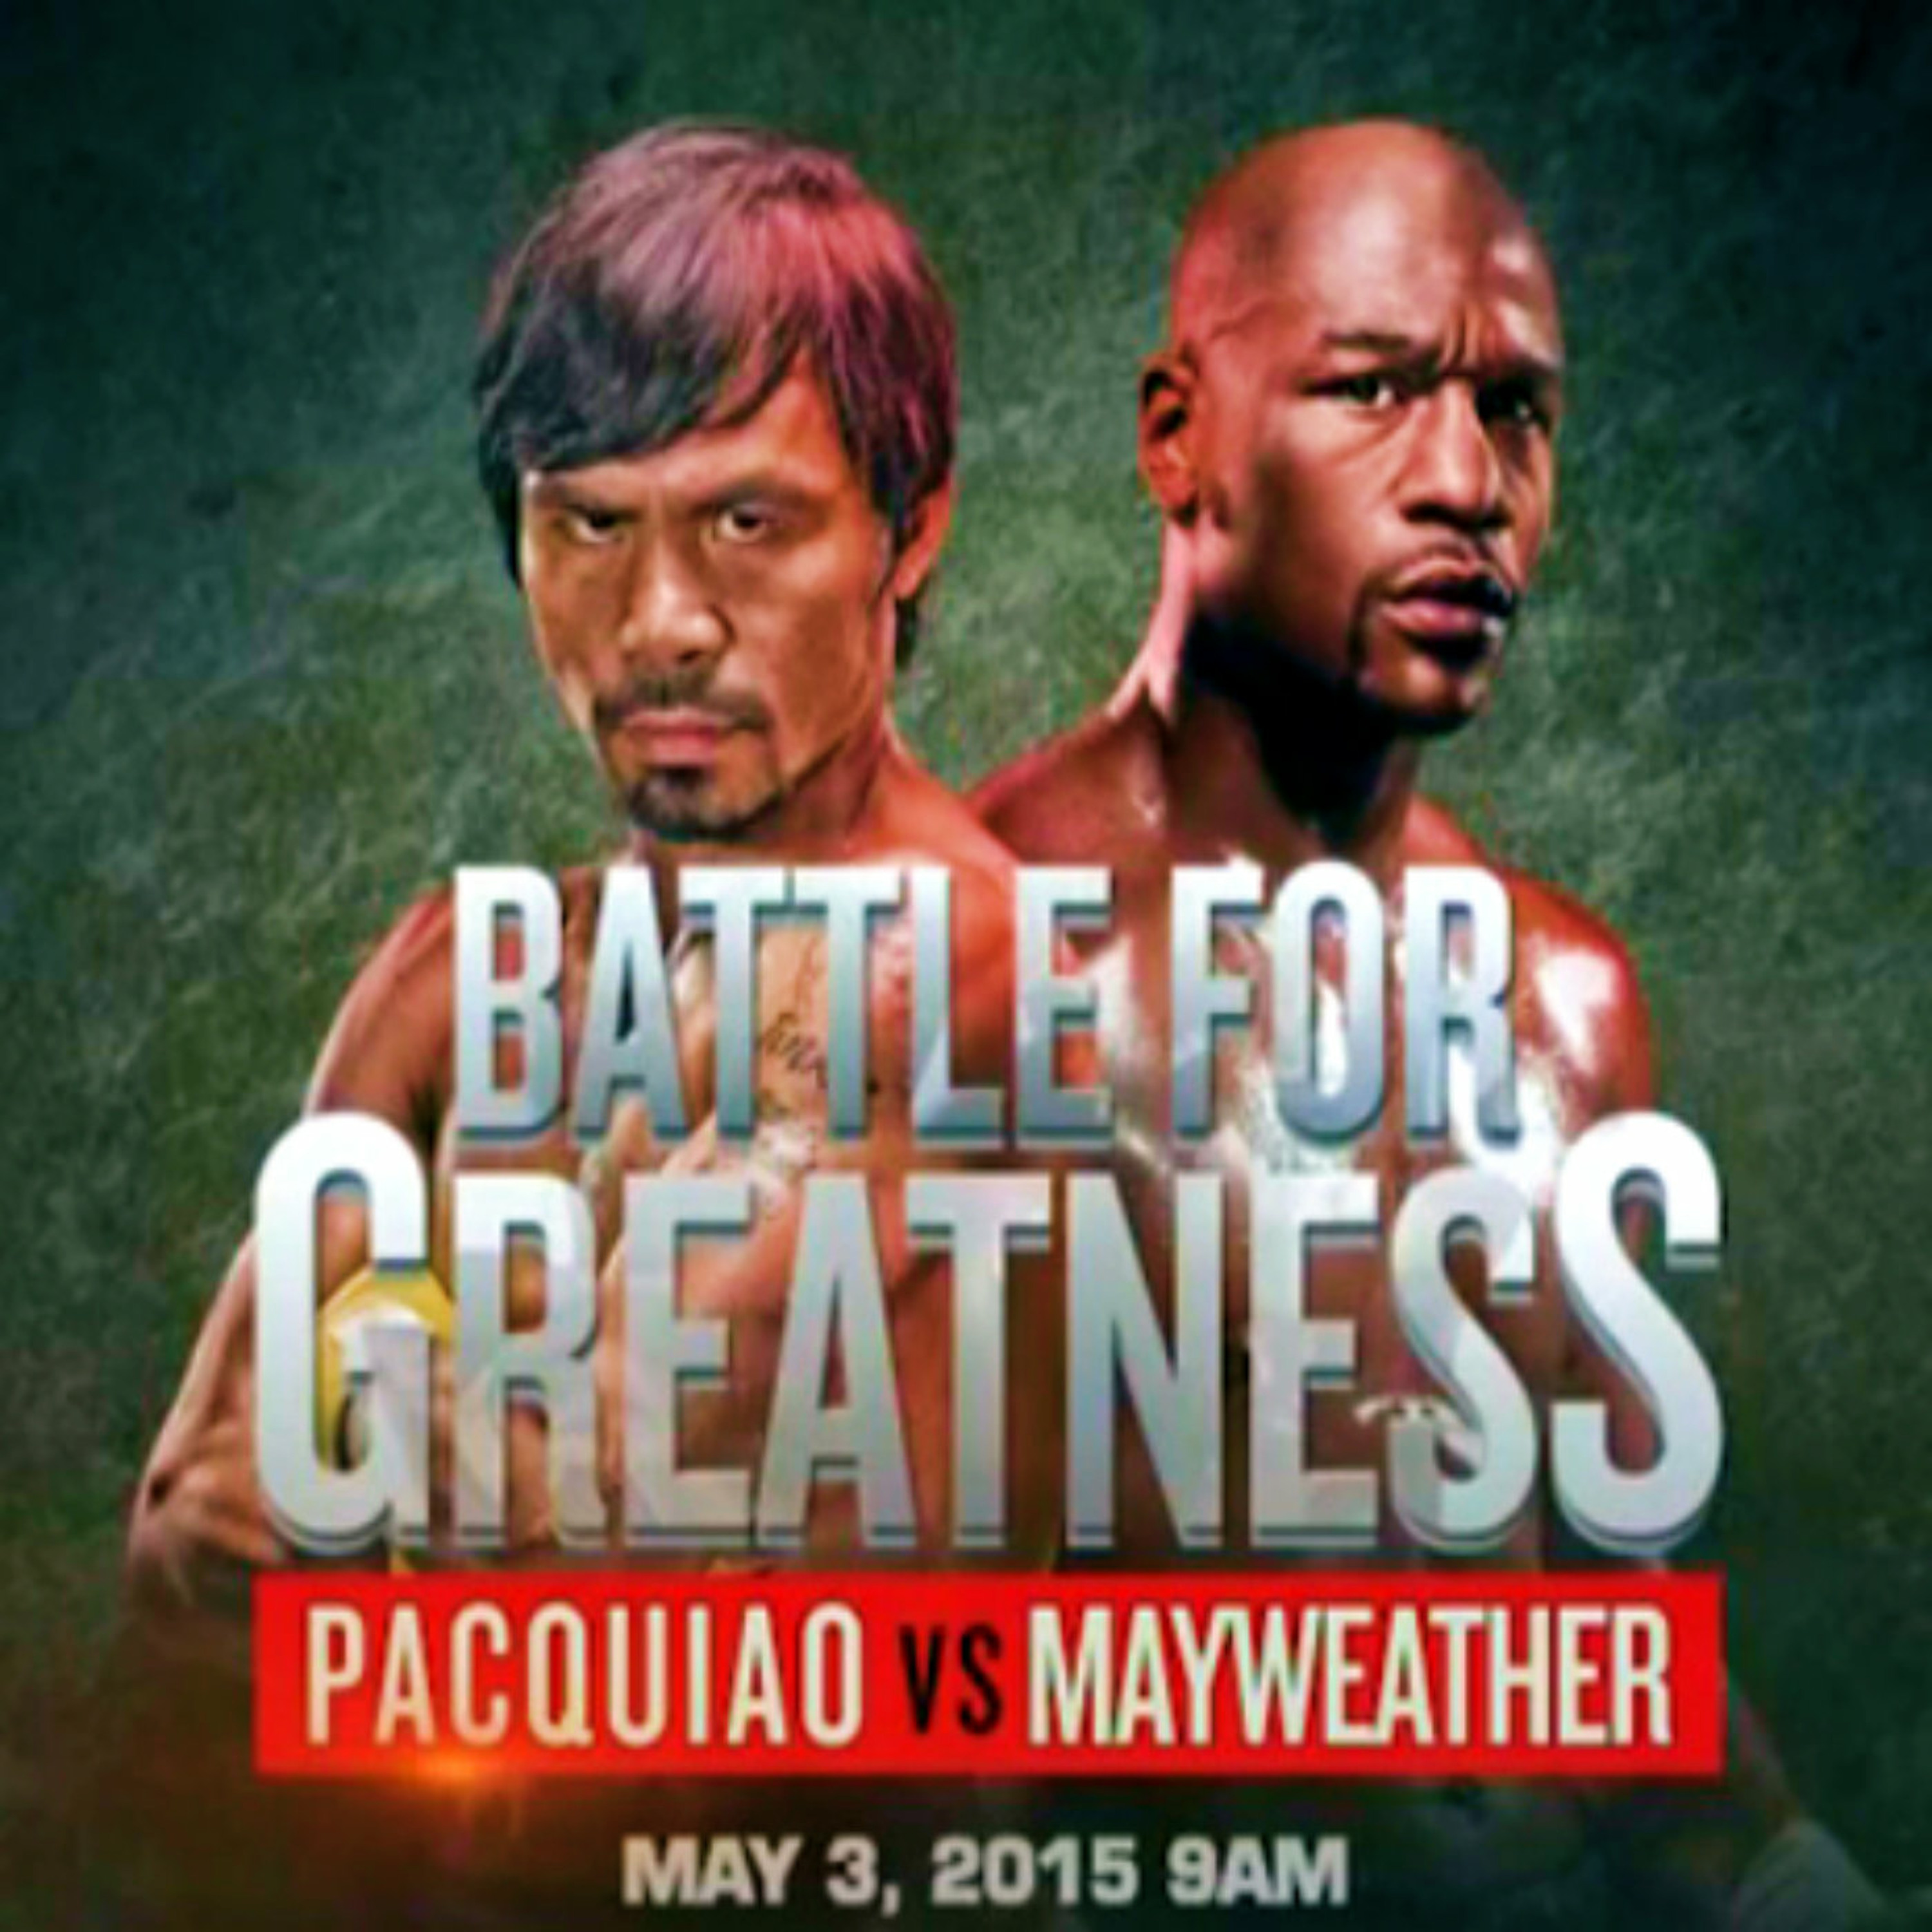 Pacman Versus Mayweather On May 3 (Ultimate Copy)